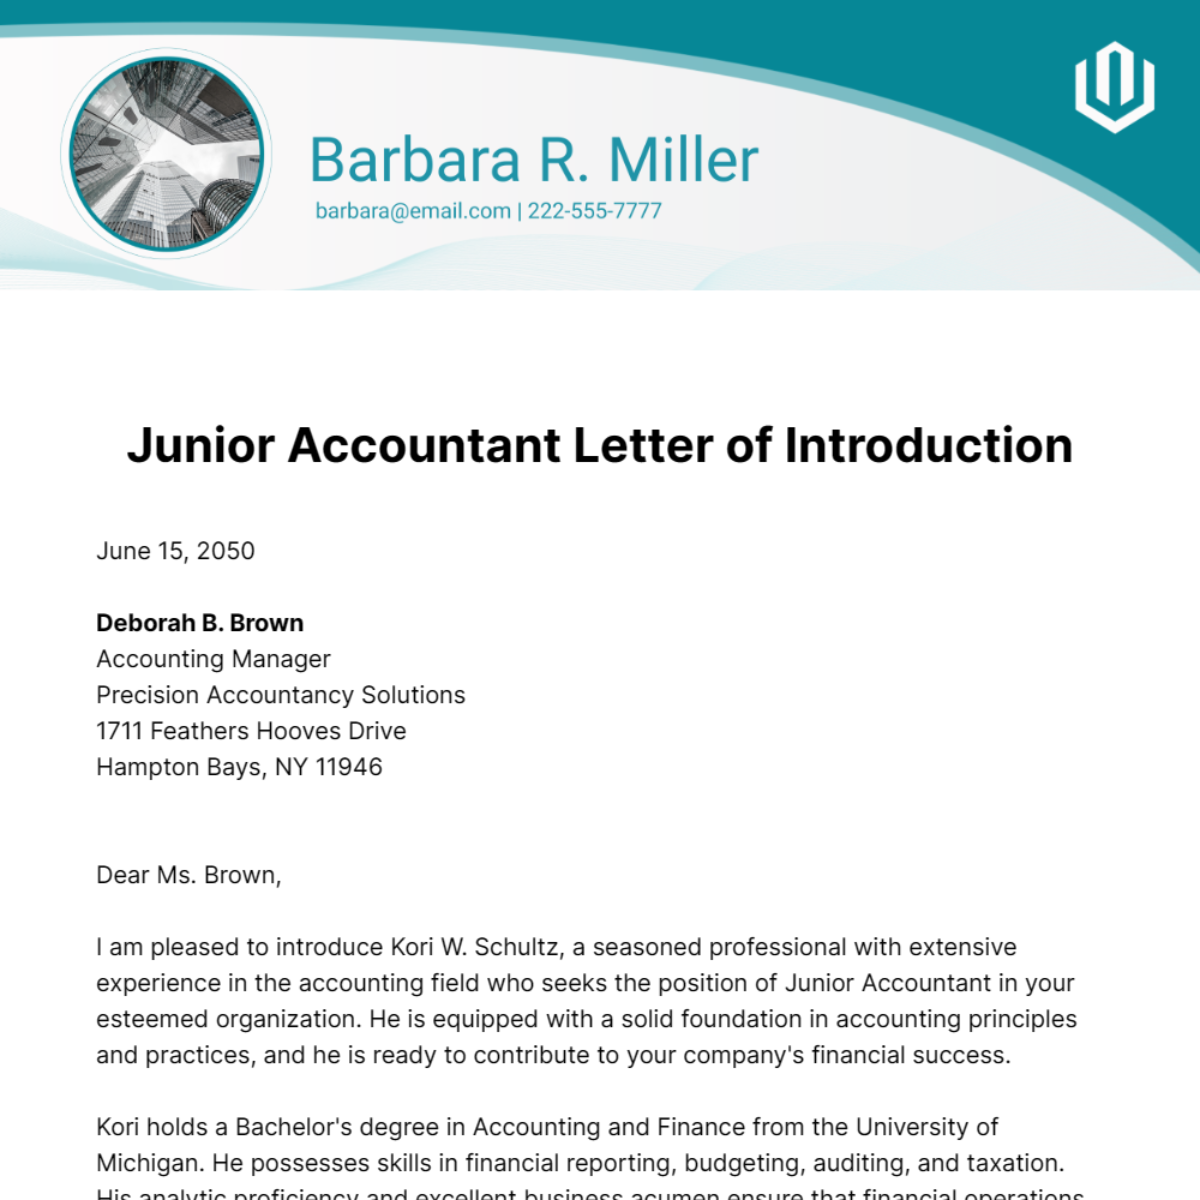 Junior Accountant Letter of Introduction Template